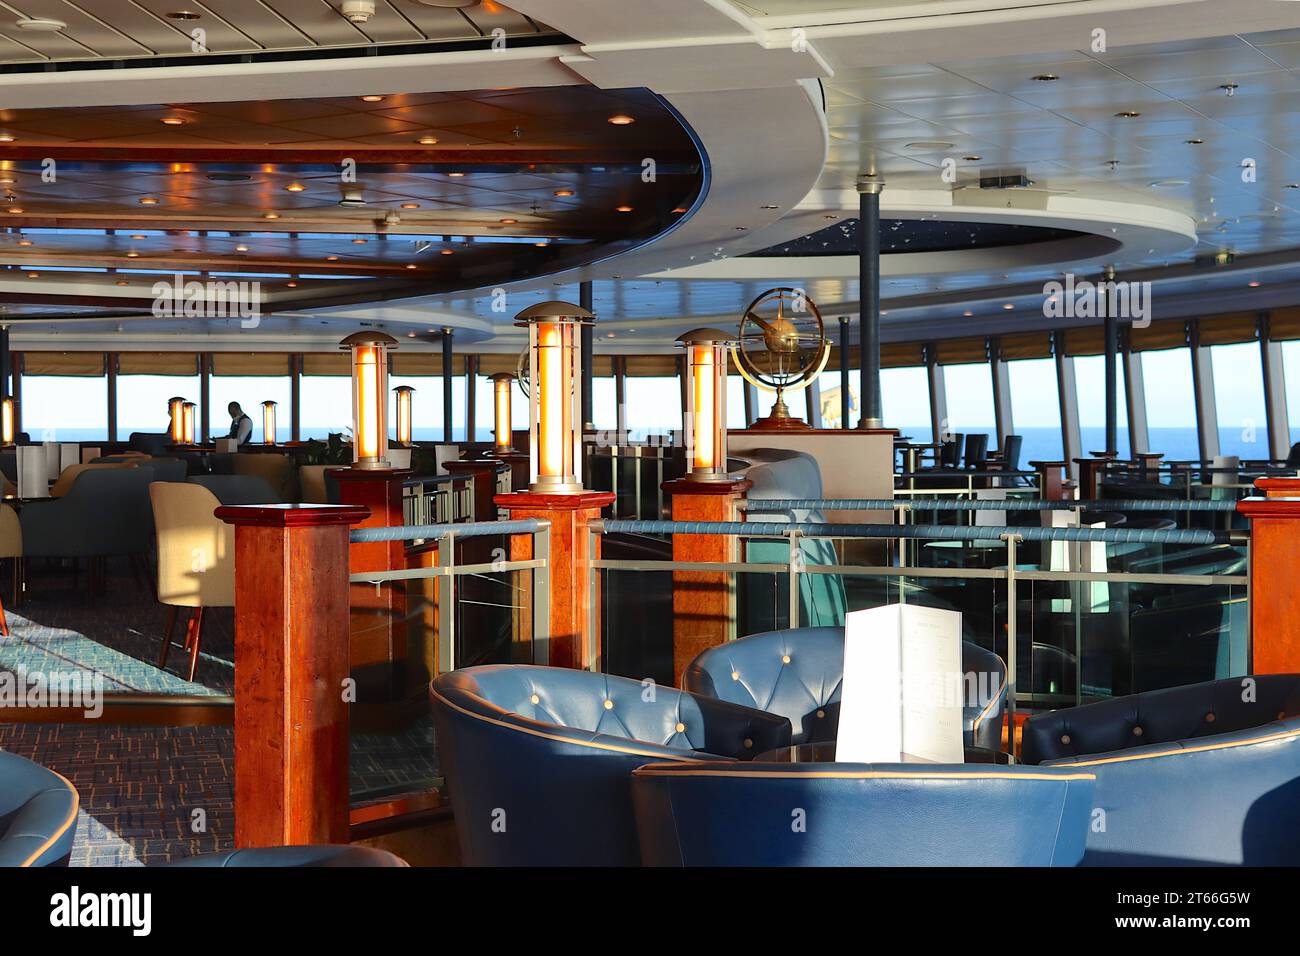 Interior of the Crow’s Nest bar on the P&O cruise ship Aurora, over 100ft above sea level and the bridge, guests enjoy 180º views sipping their drinks. Stock Photo